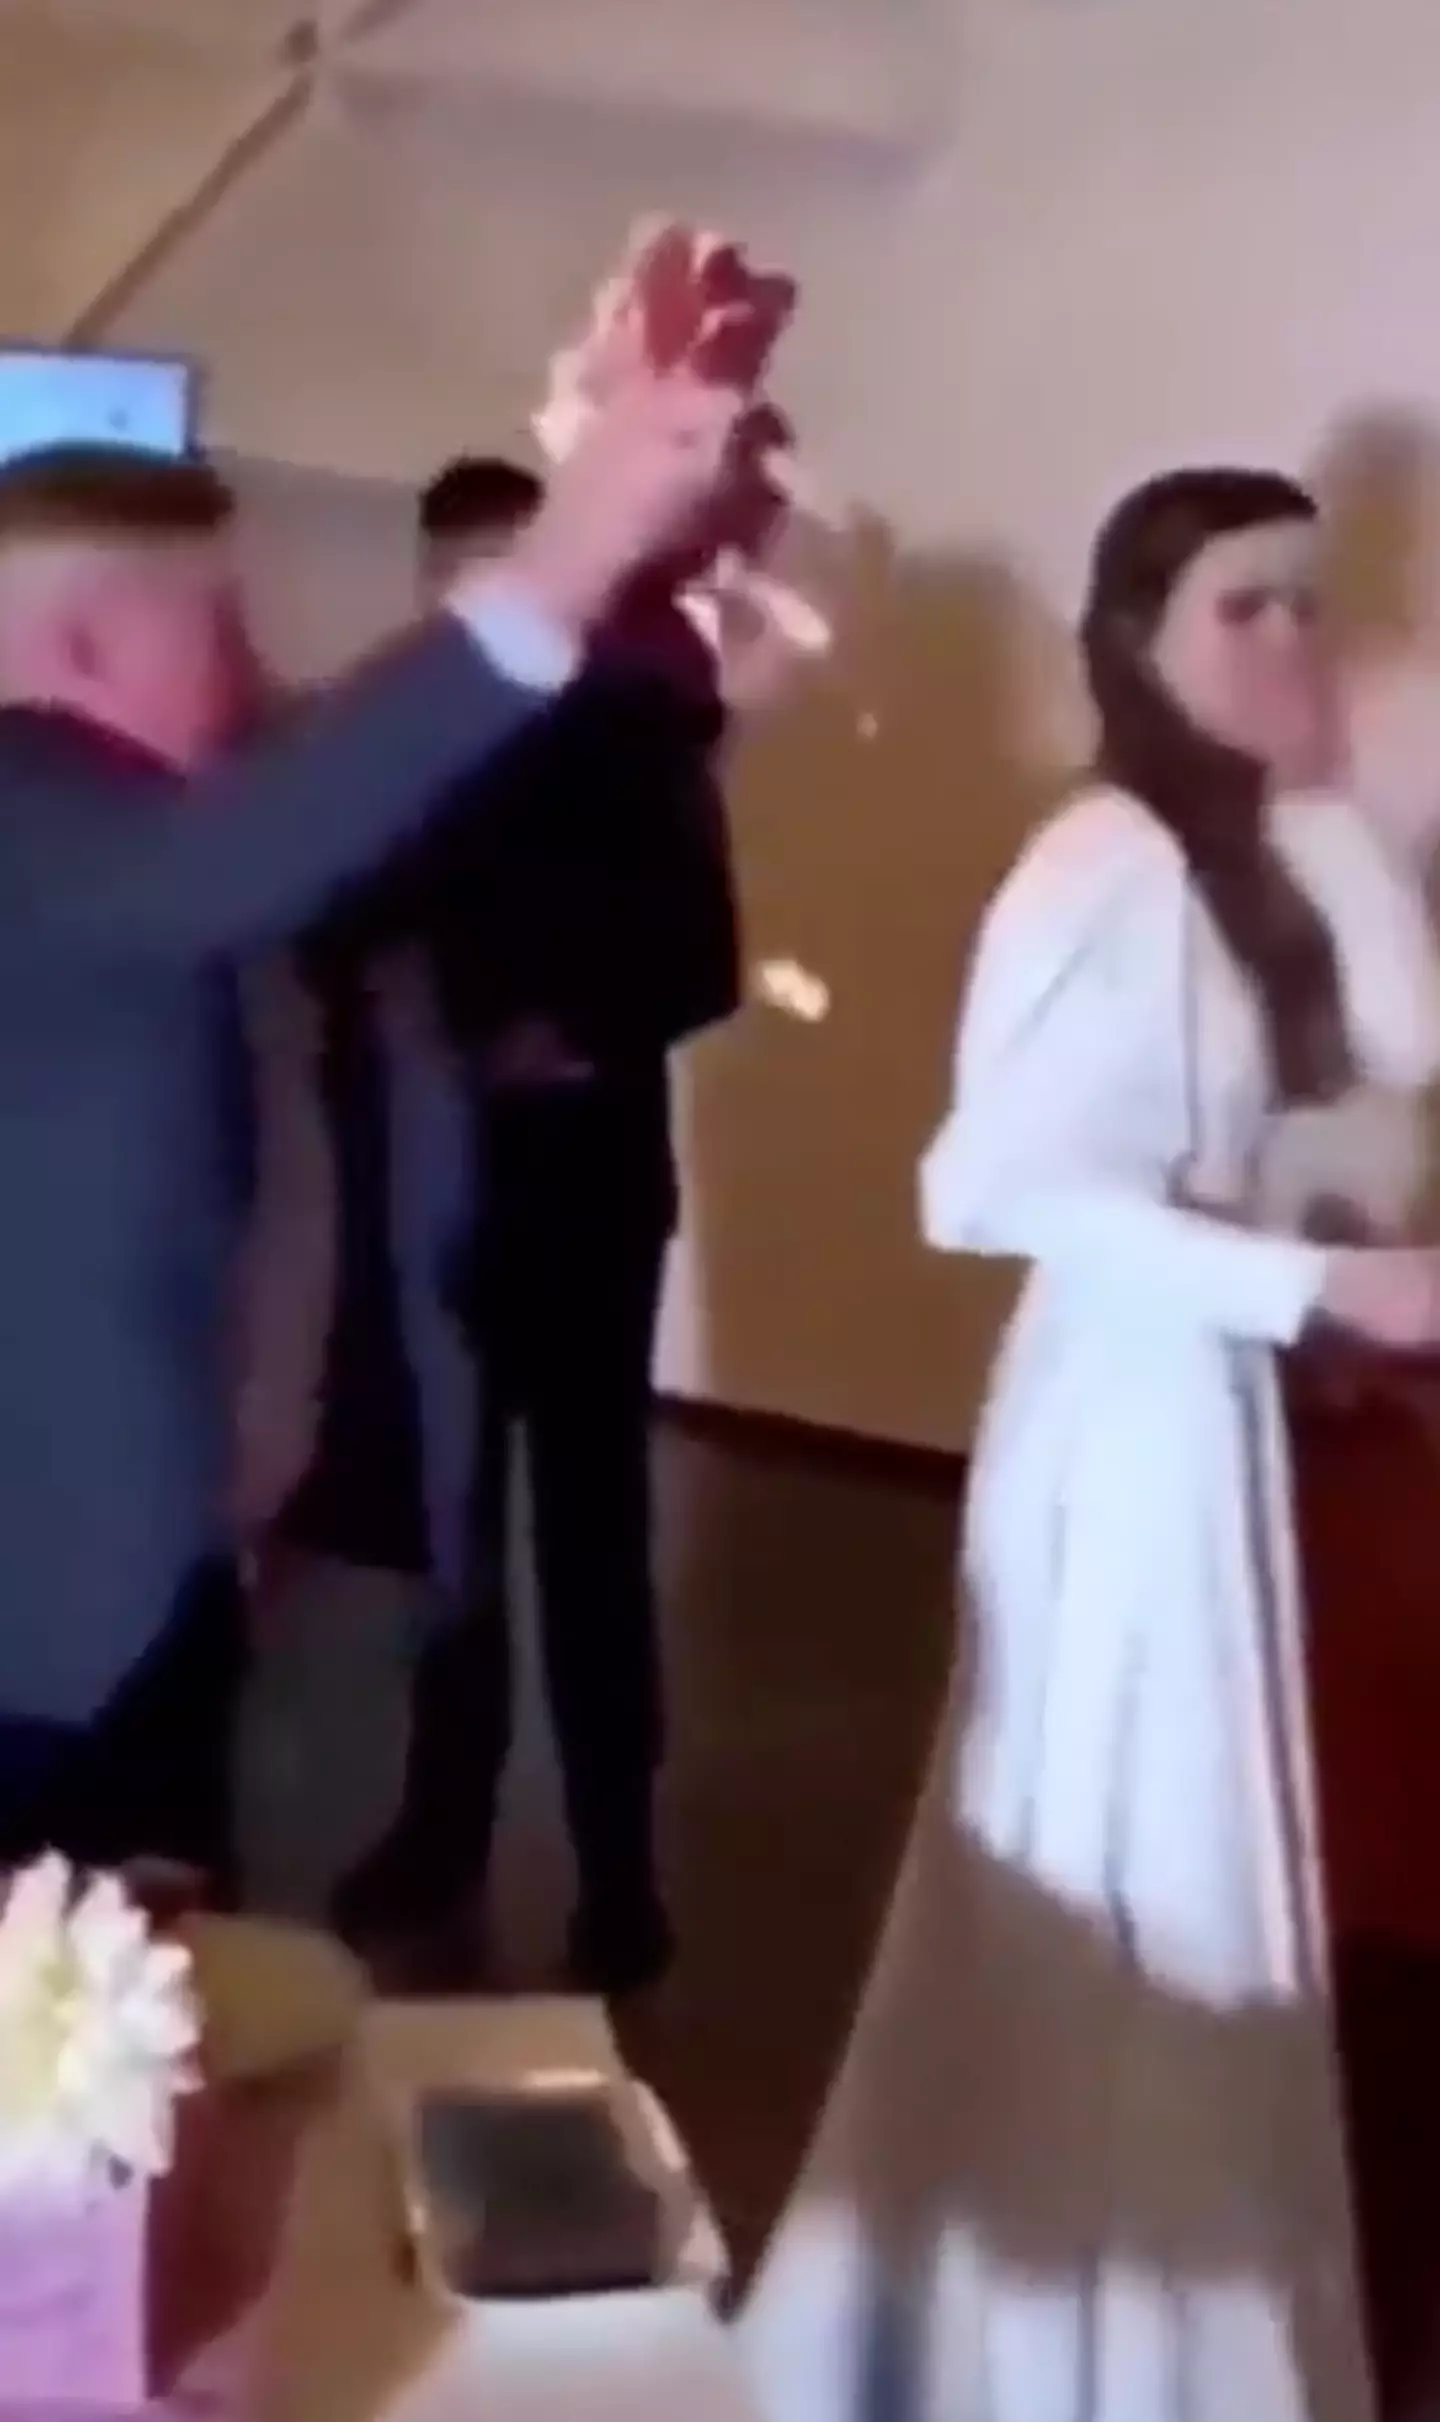 A video has been making its rounds on social media showing a man throw cake at a bride and groom.